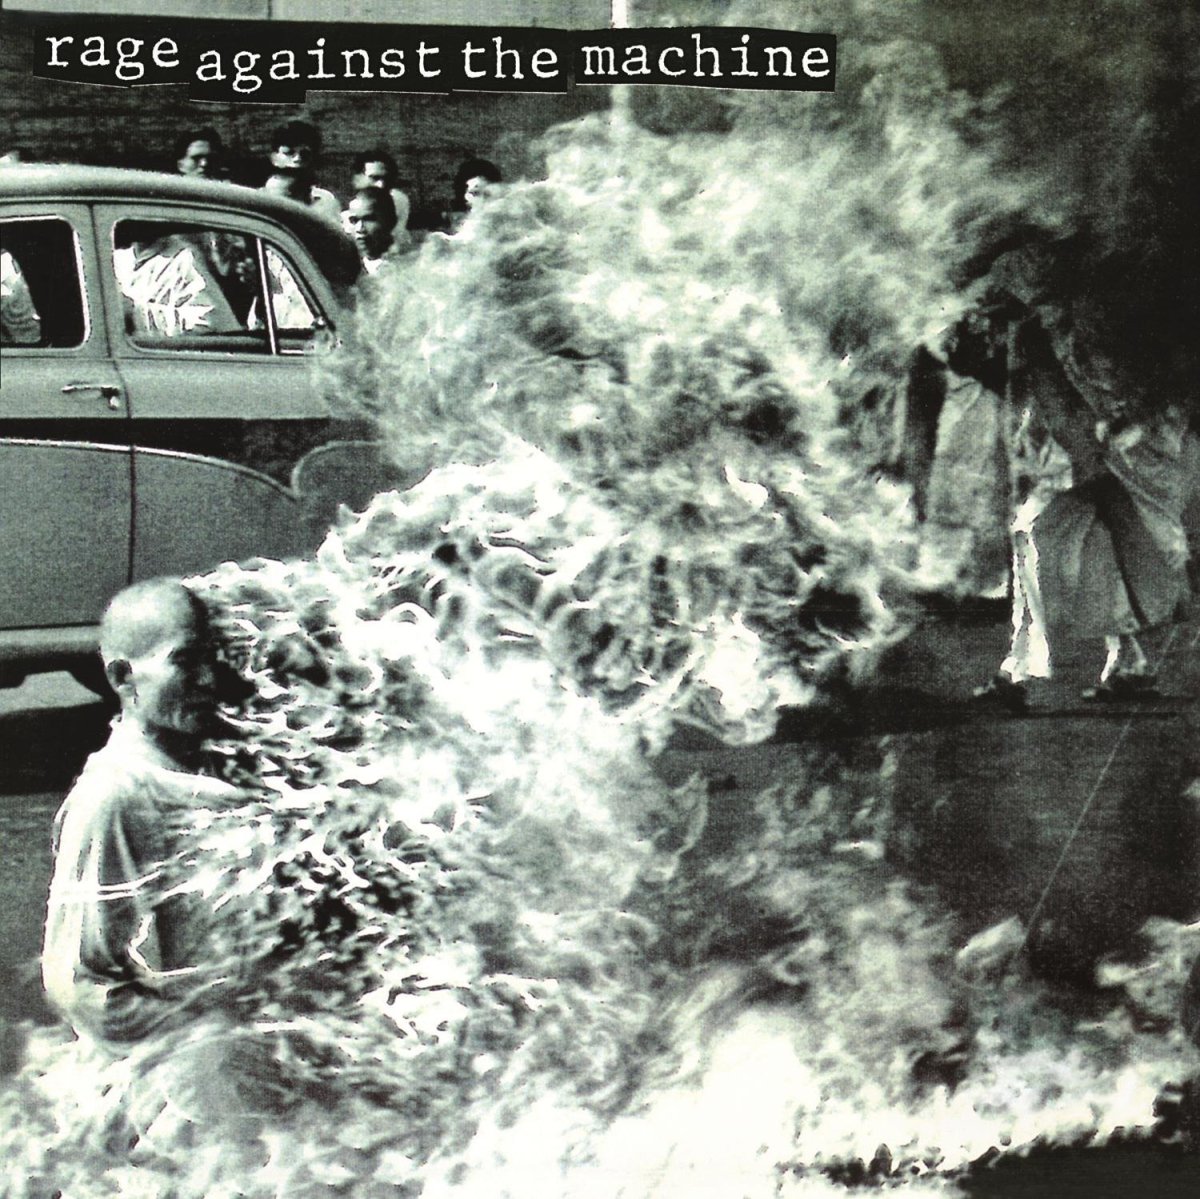 "Rage Against the Machine" by Rage Against the Machine